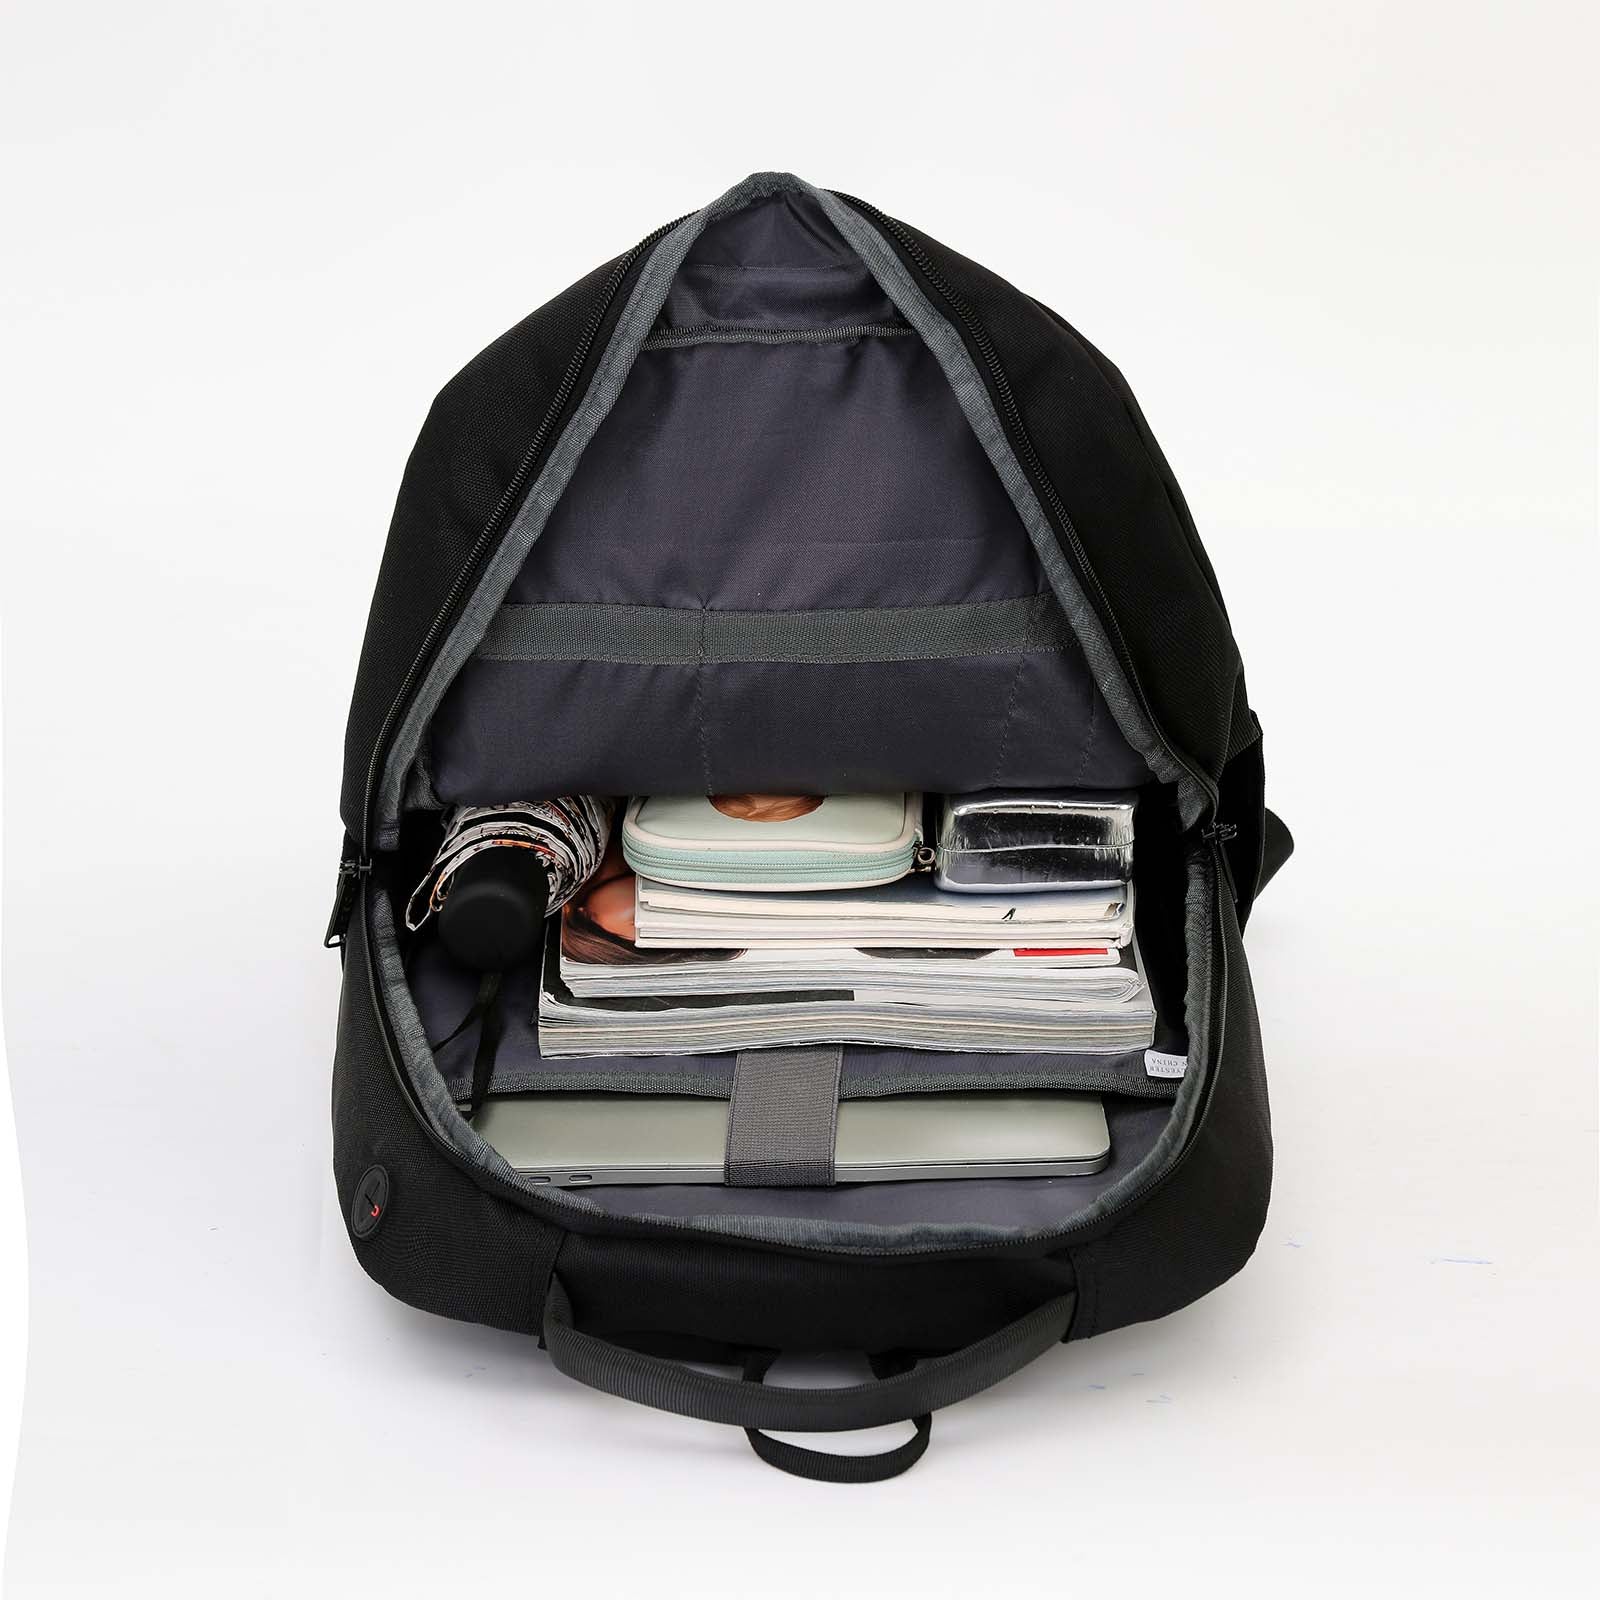 tosca-laptop-compartment-backpack-35l-black-open